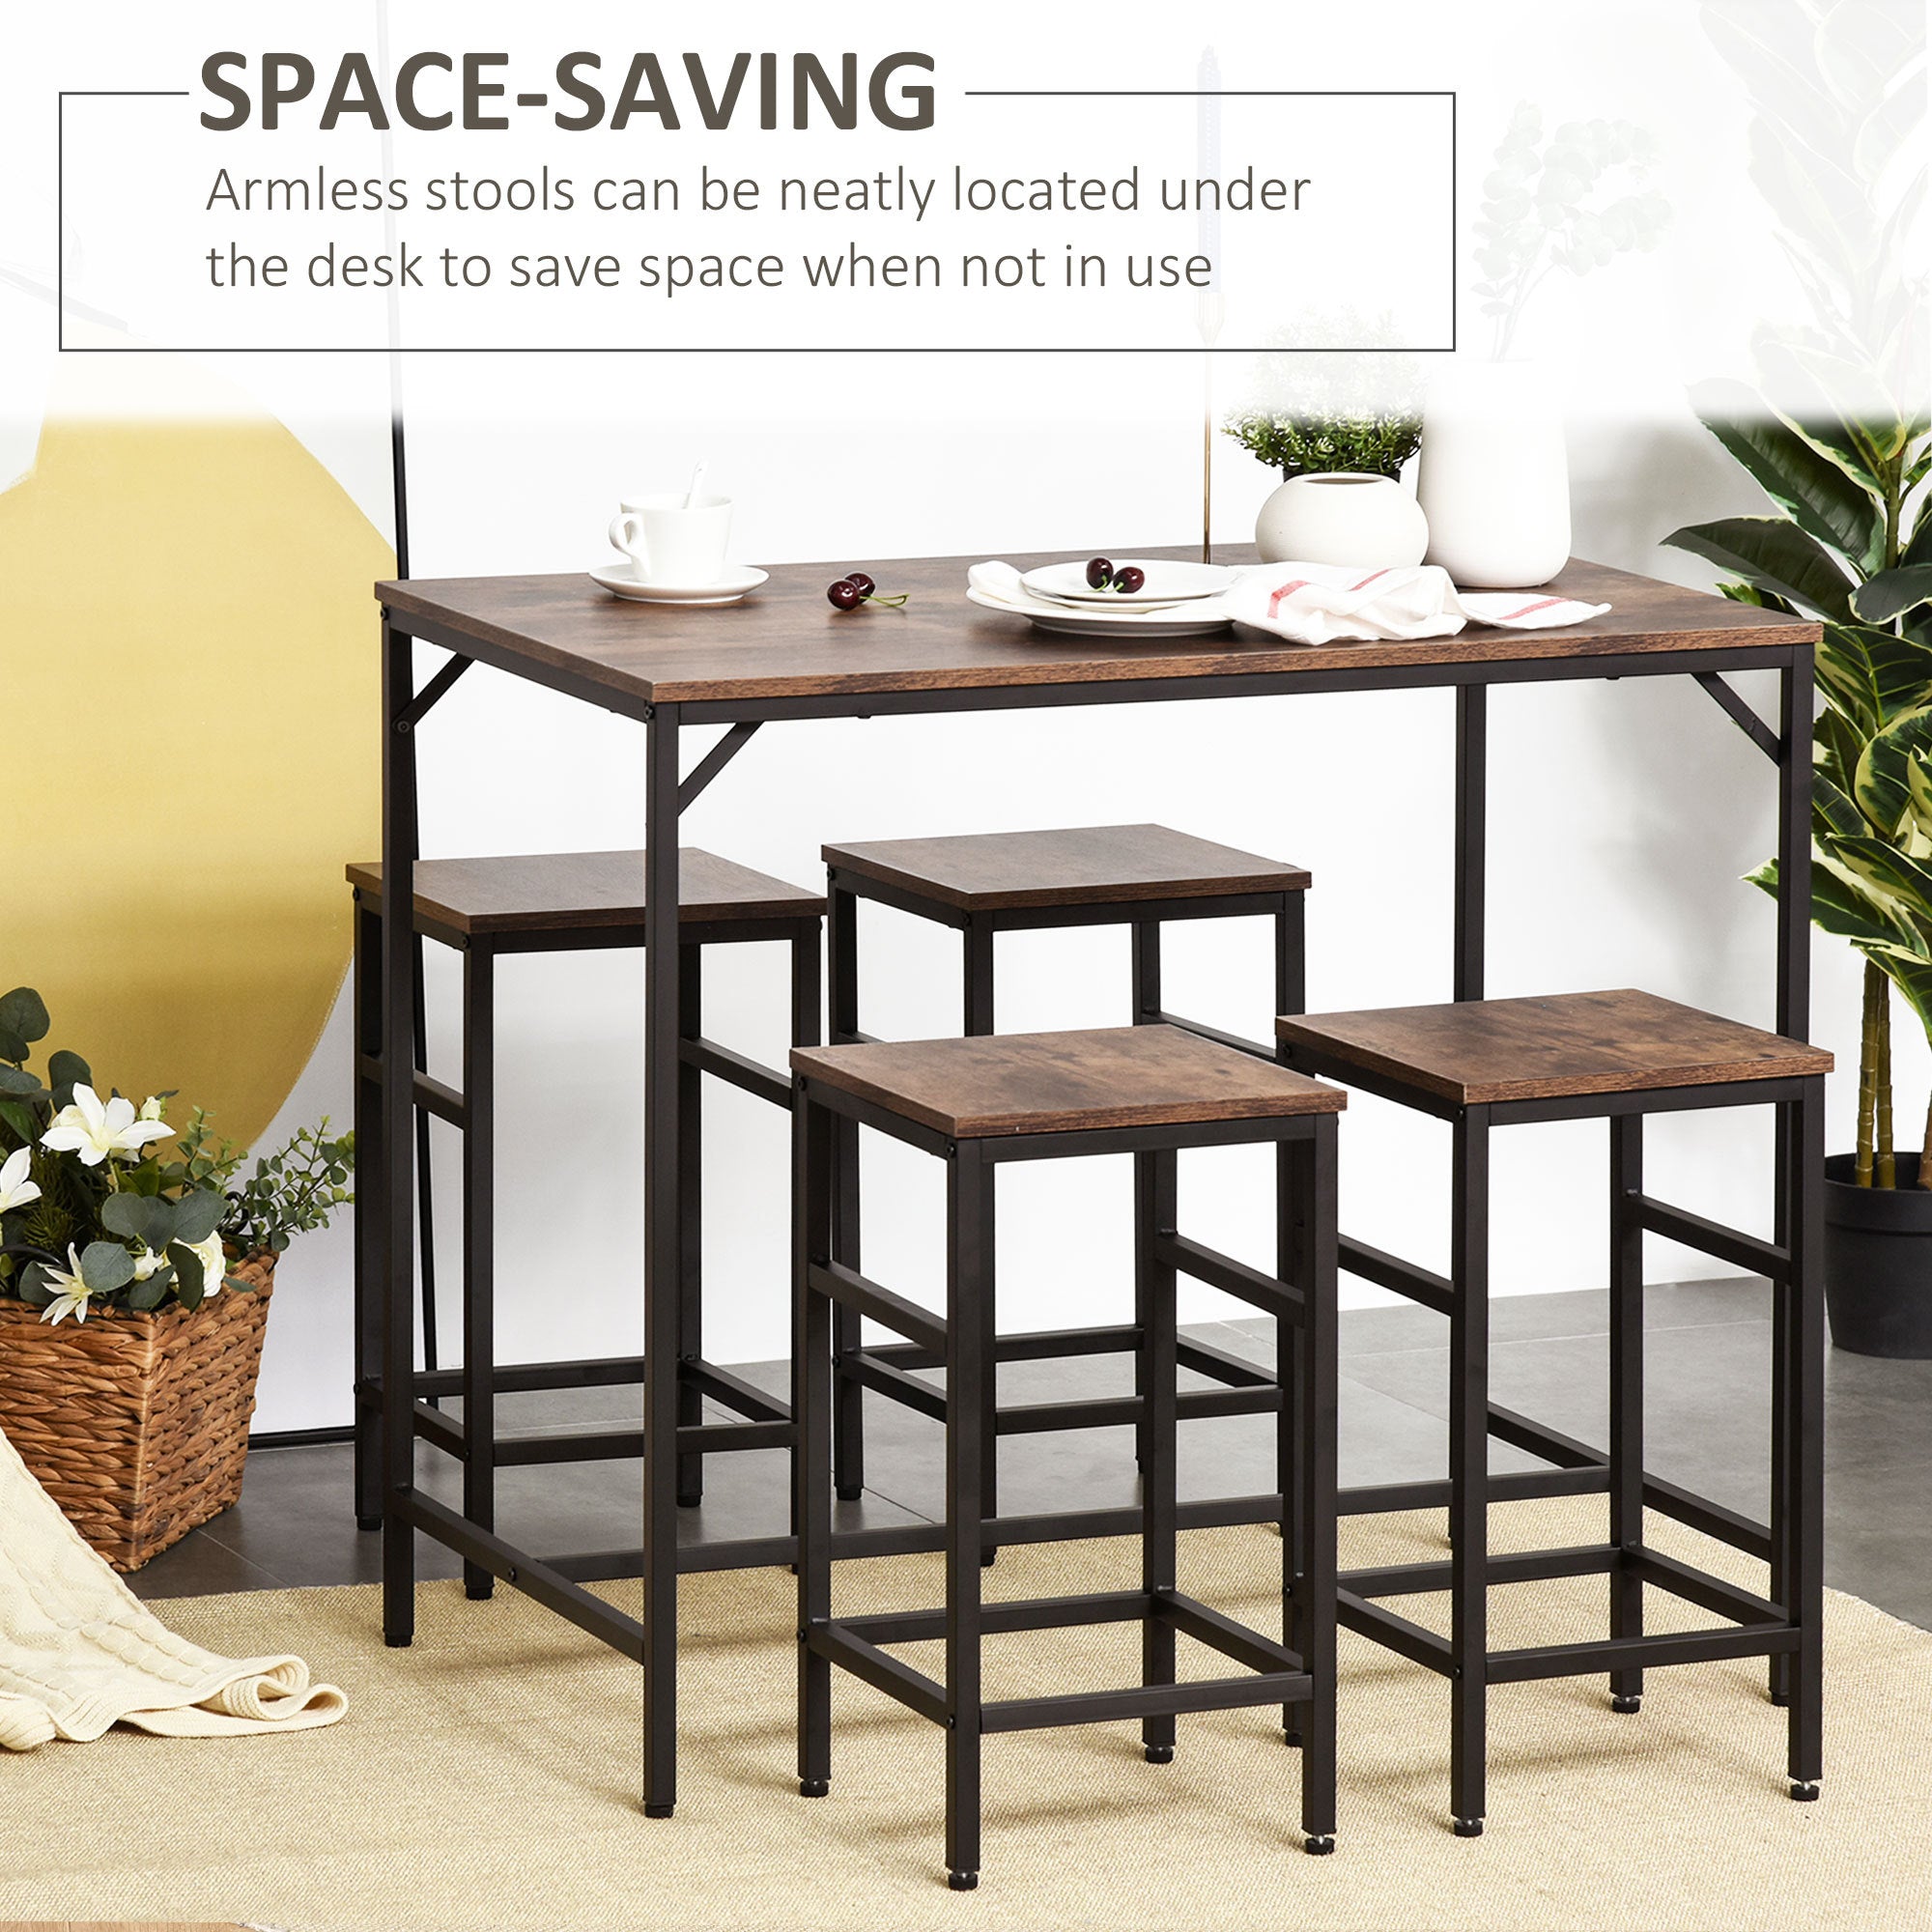 5 Piece Industrial Dining Table Set, Bar Table & 4 rustic brown-particle board